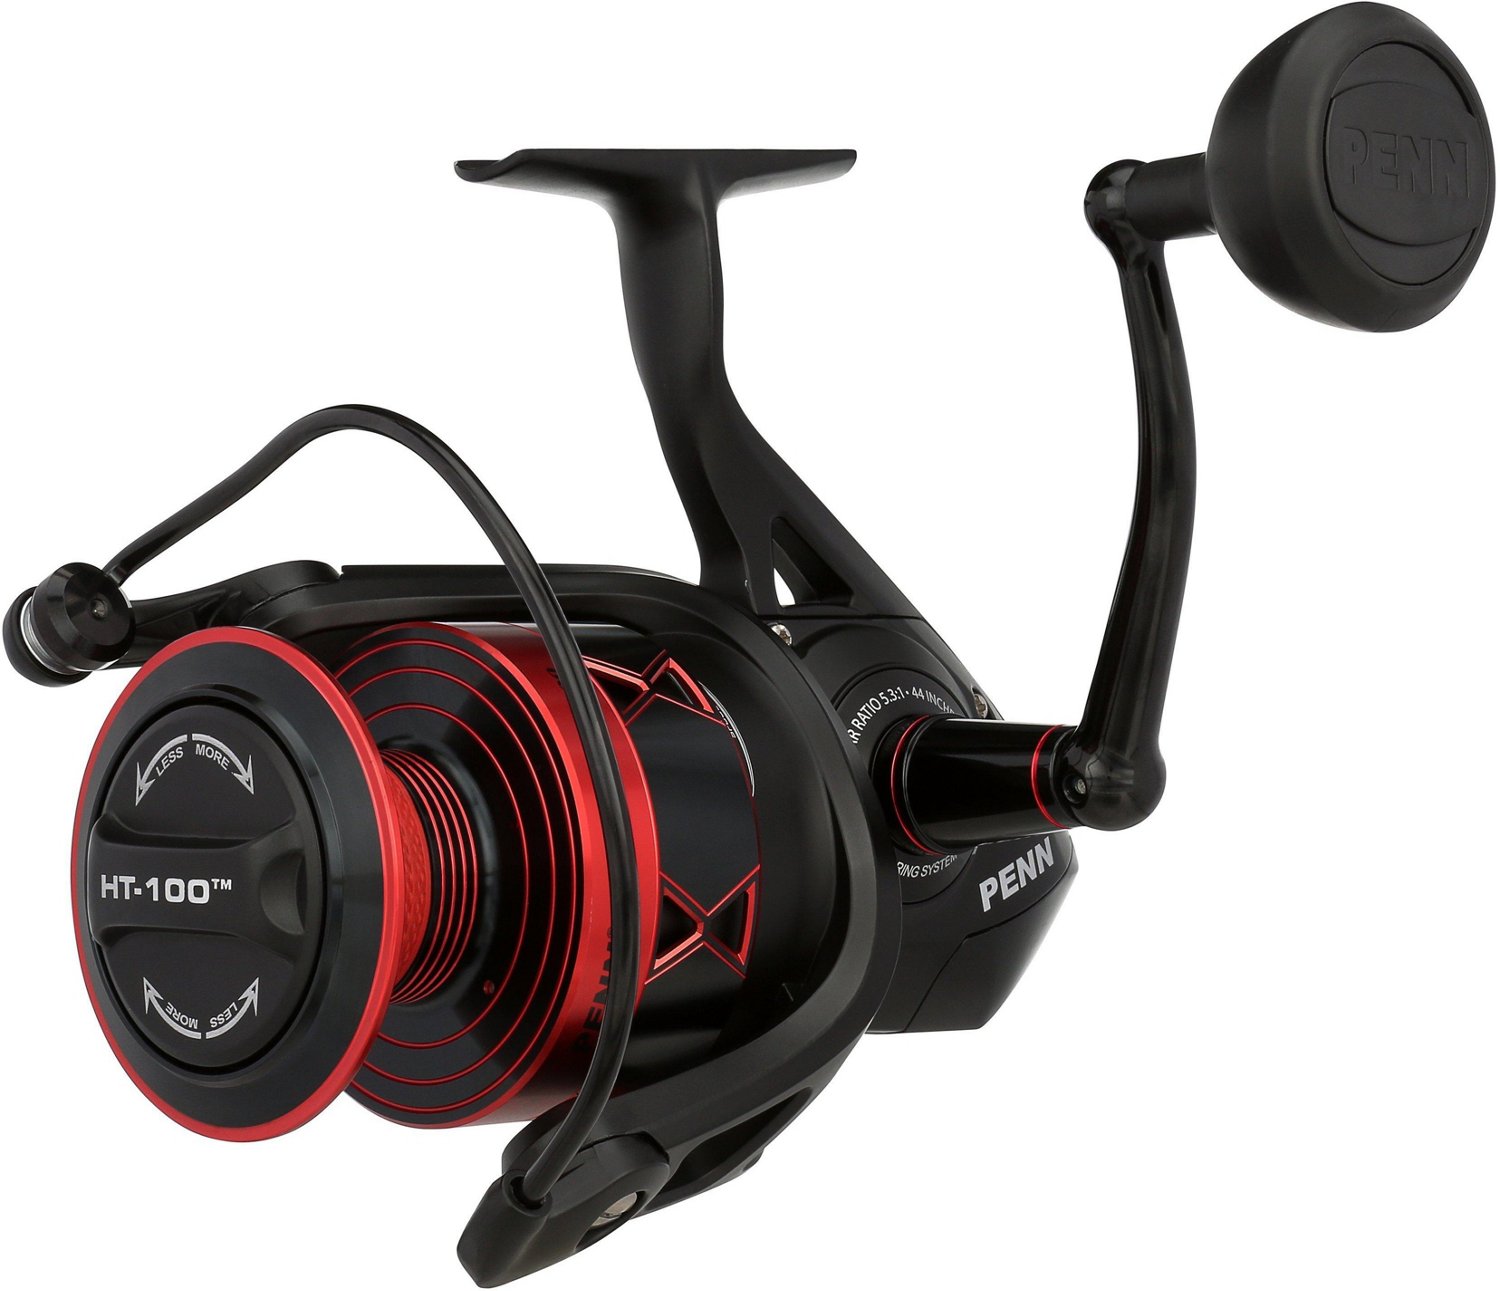 PENN Fierce IV Spinning Rod and Reel Combo - Spinning Combos at Academy  Sports FRCIV3000701ML 031324280229